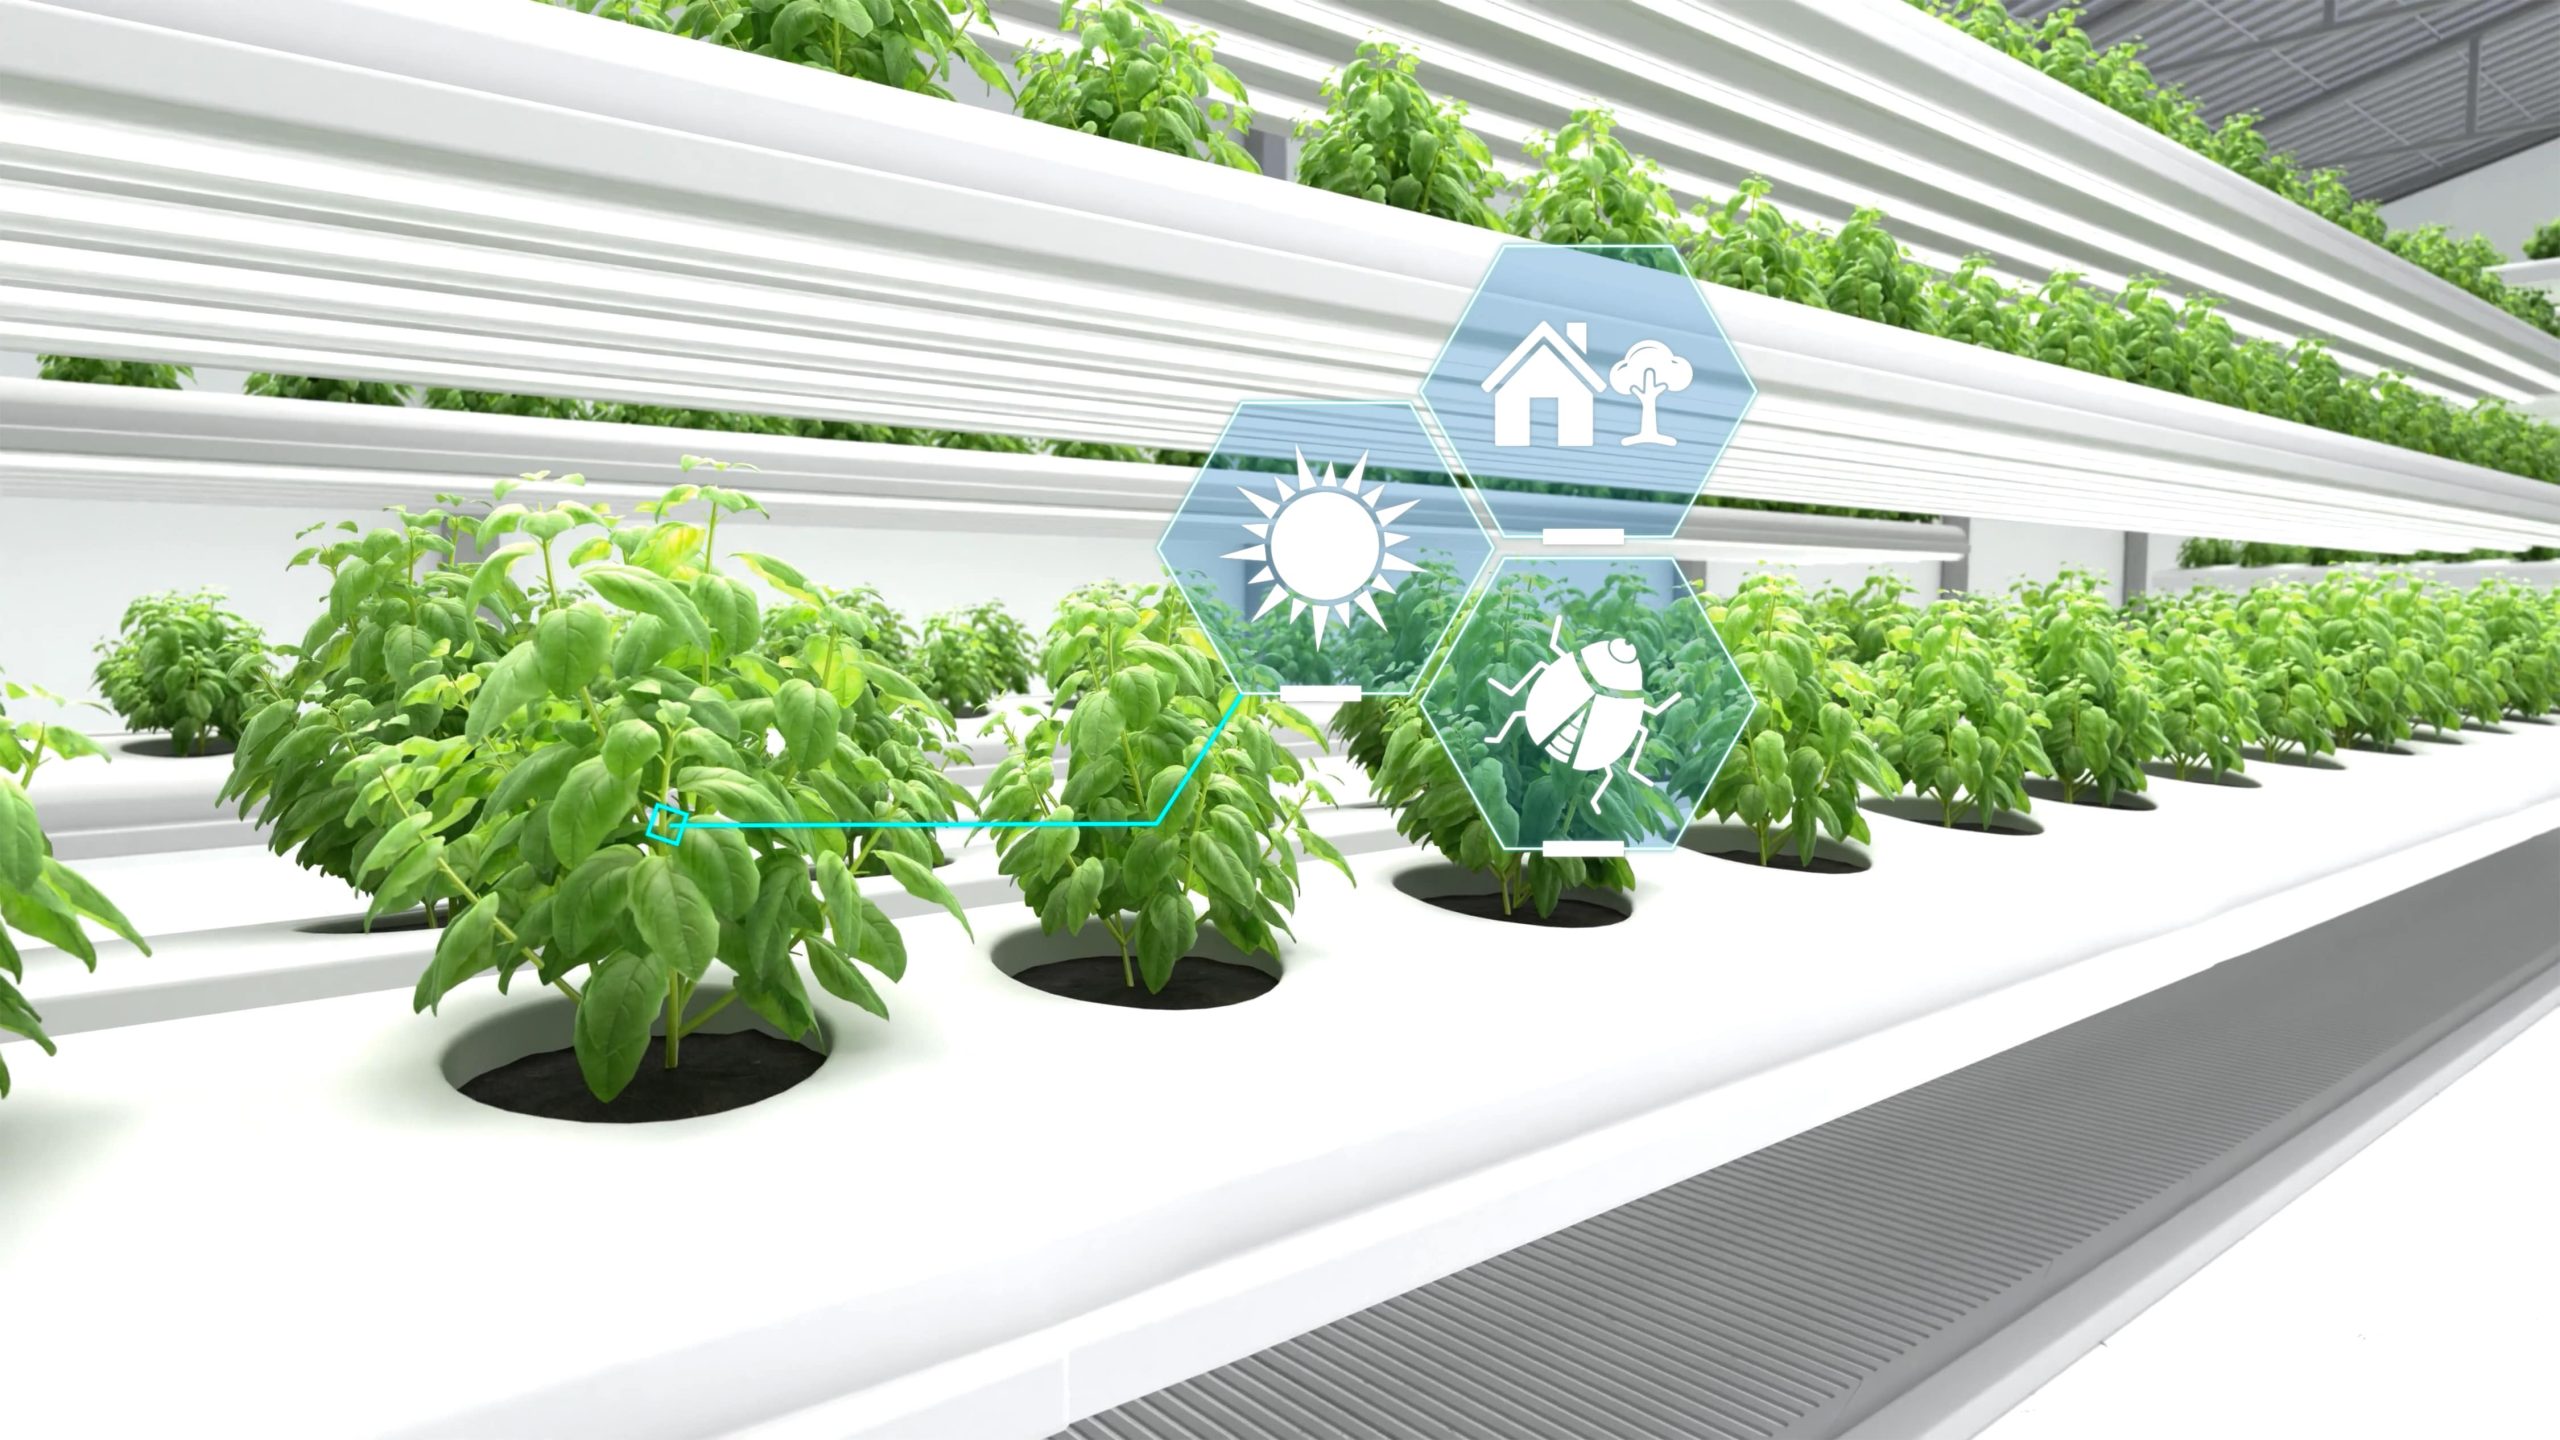 Cyber-Physical Systems in Agriculture: Smart Farming for Sustainable Food Production | Smart Farming, Sustainable Food Production